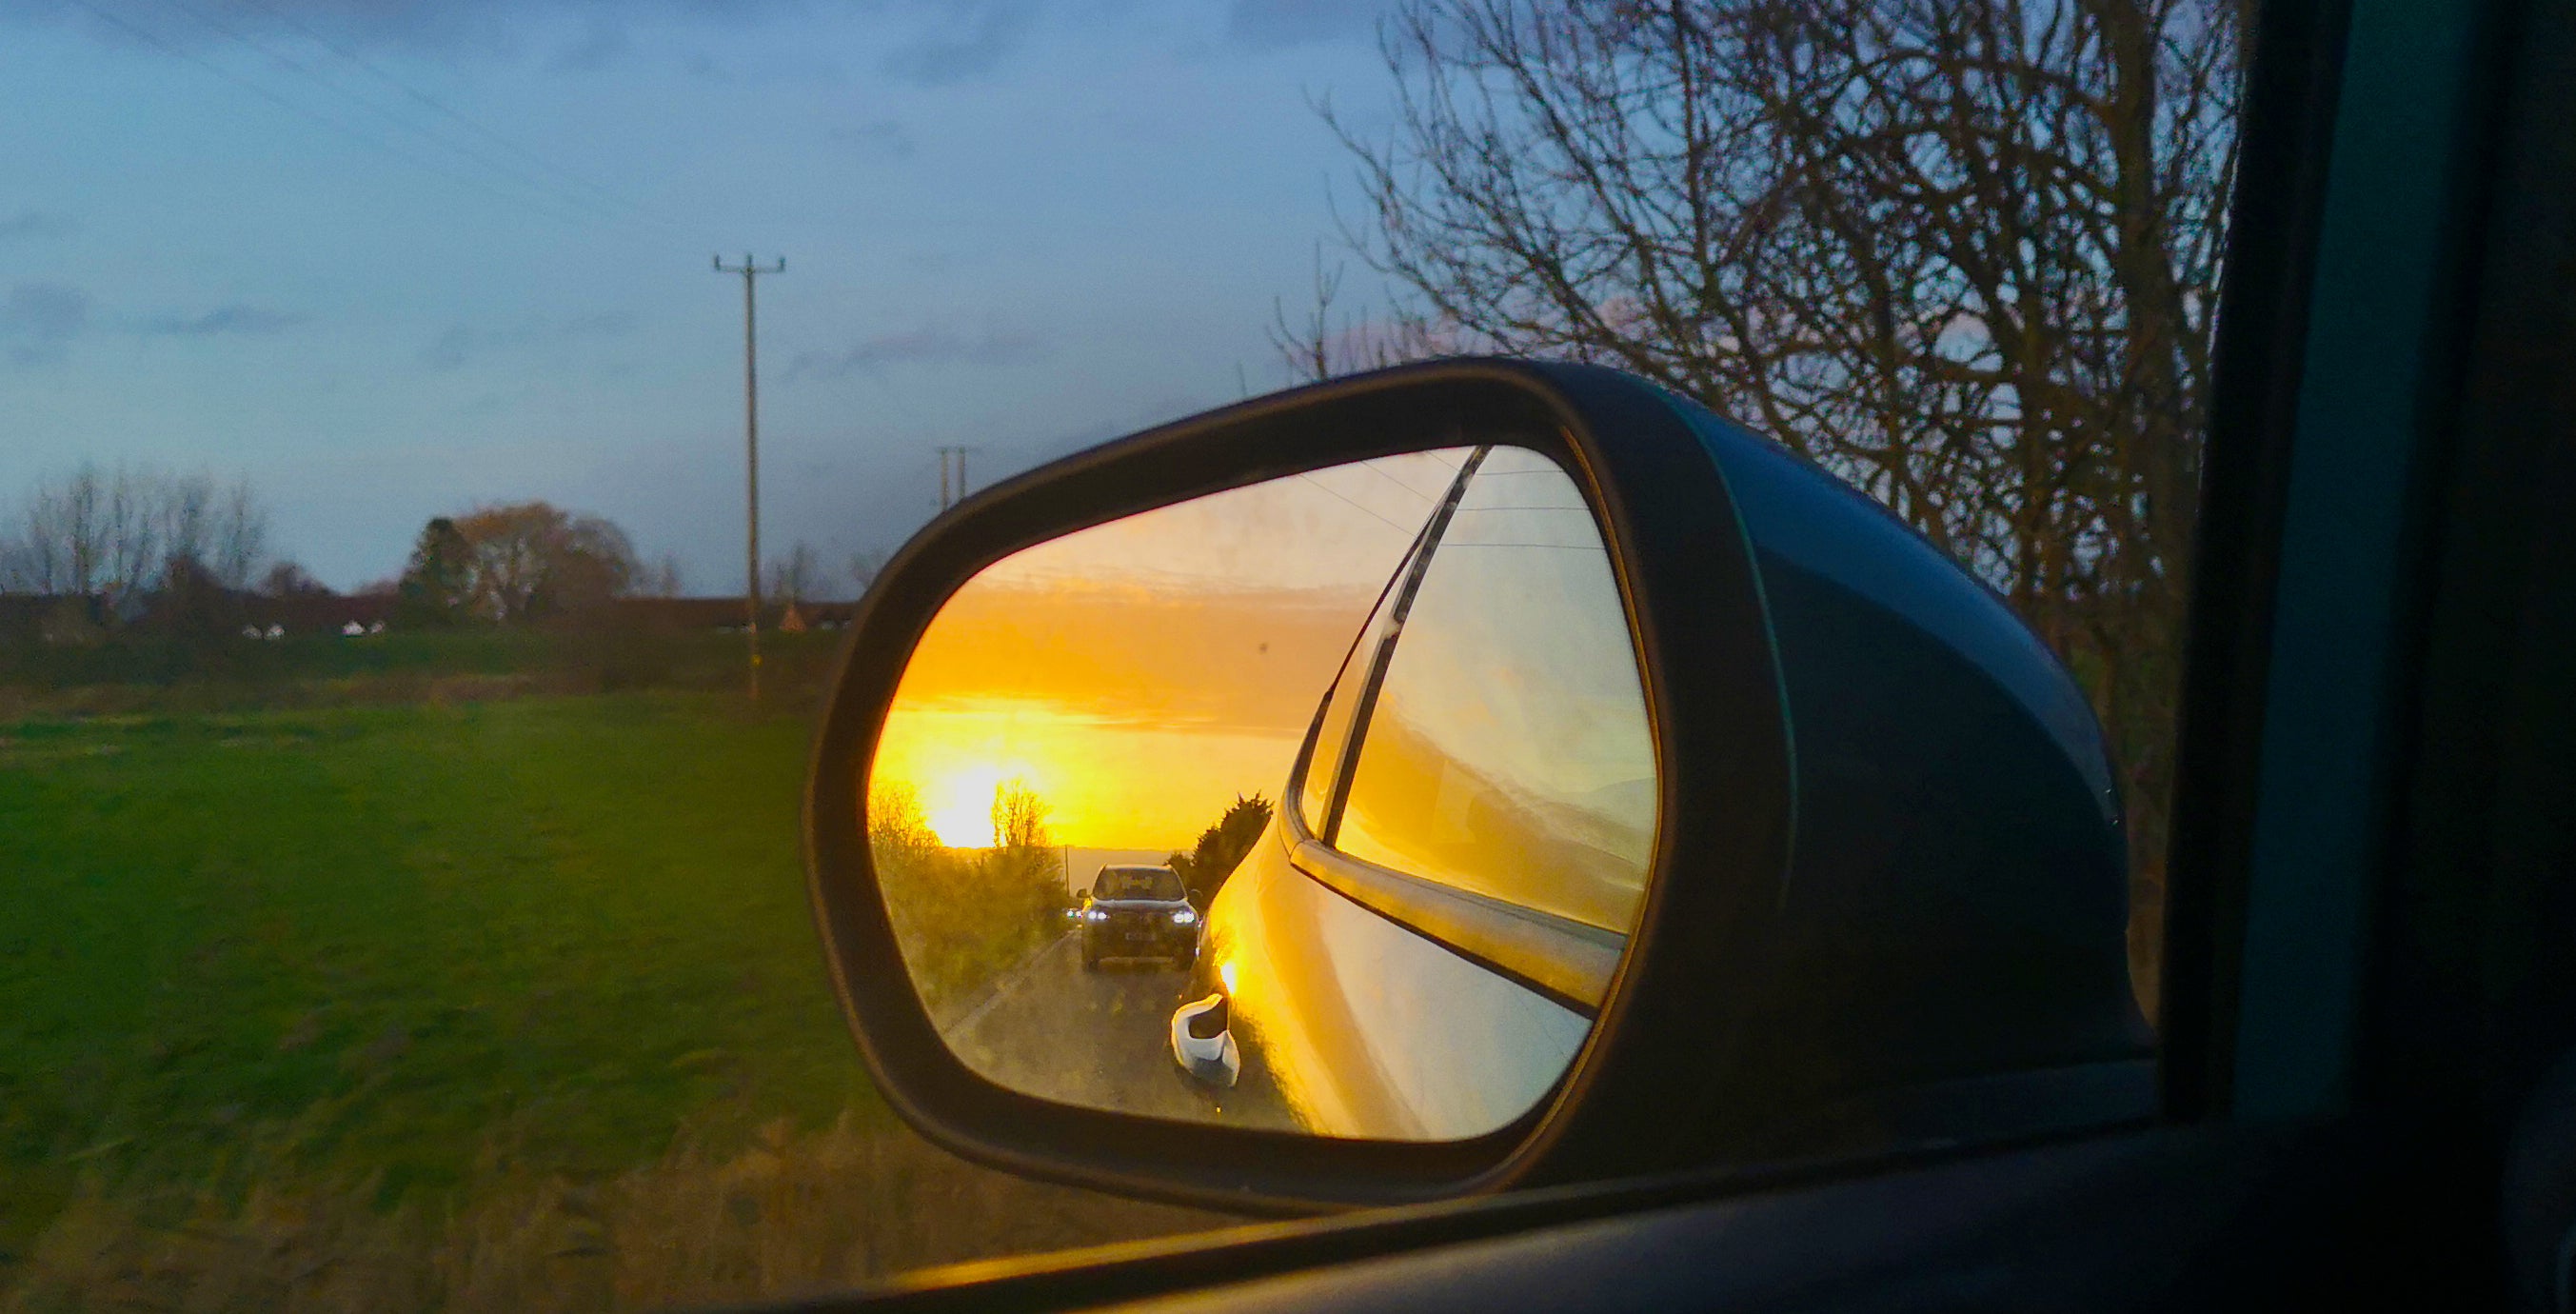 last sun set of the year in the rear view mirror